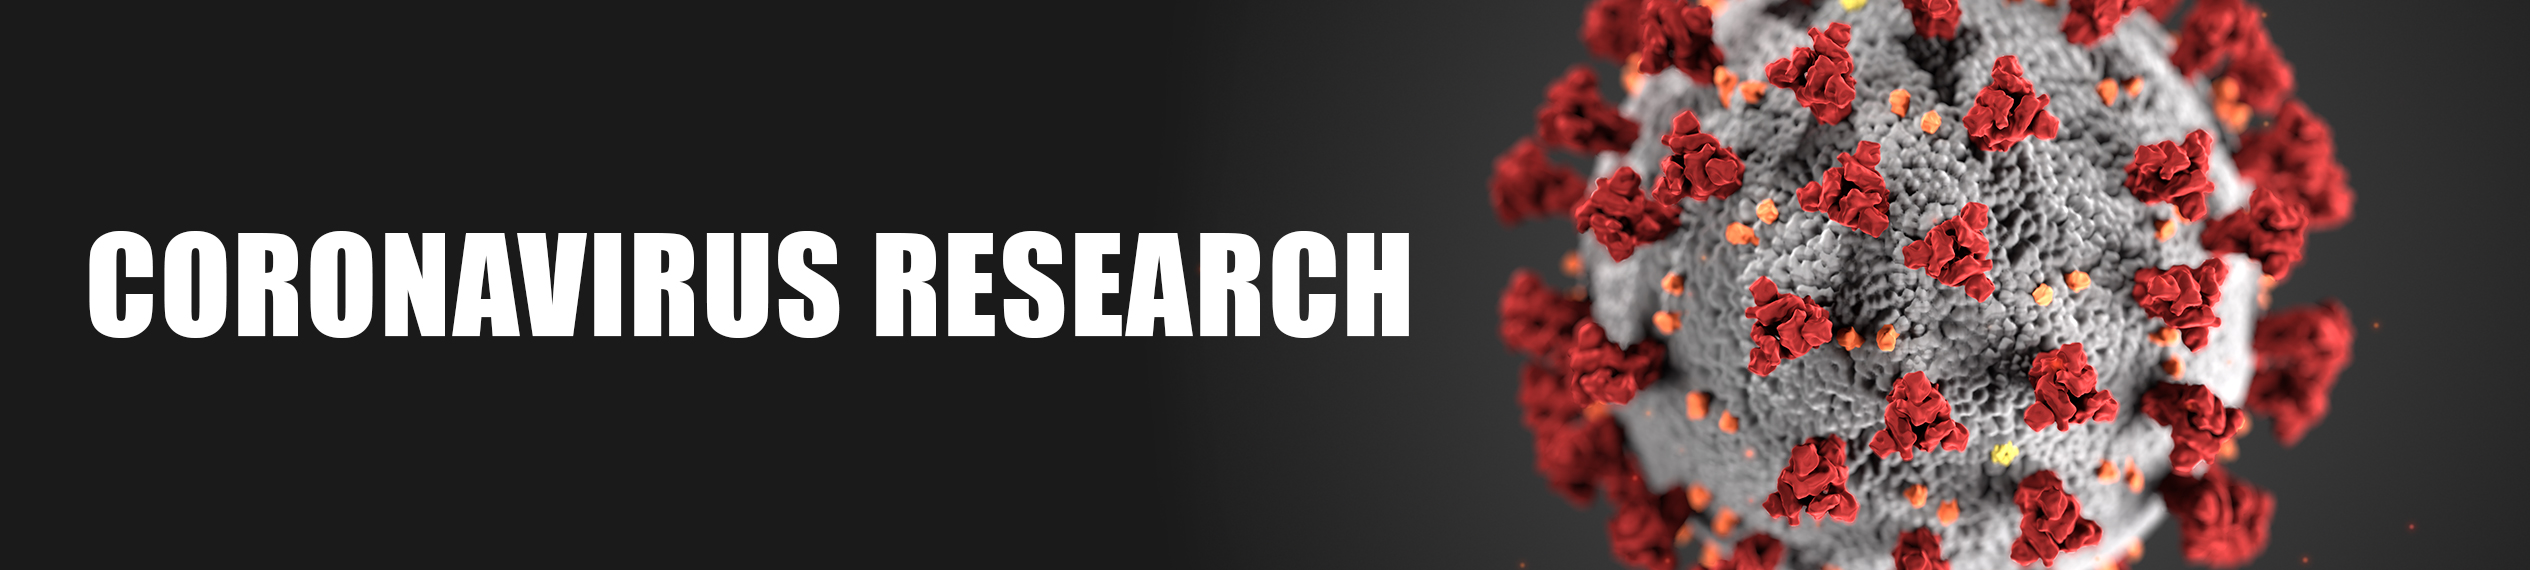 Coronavirus Research banner with microscopic view of COVID-19 protein